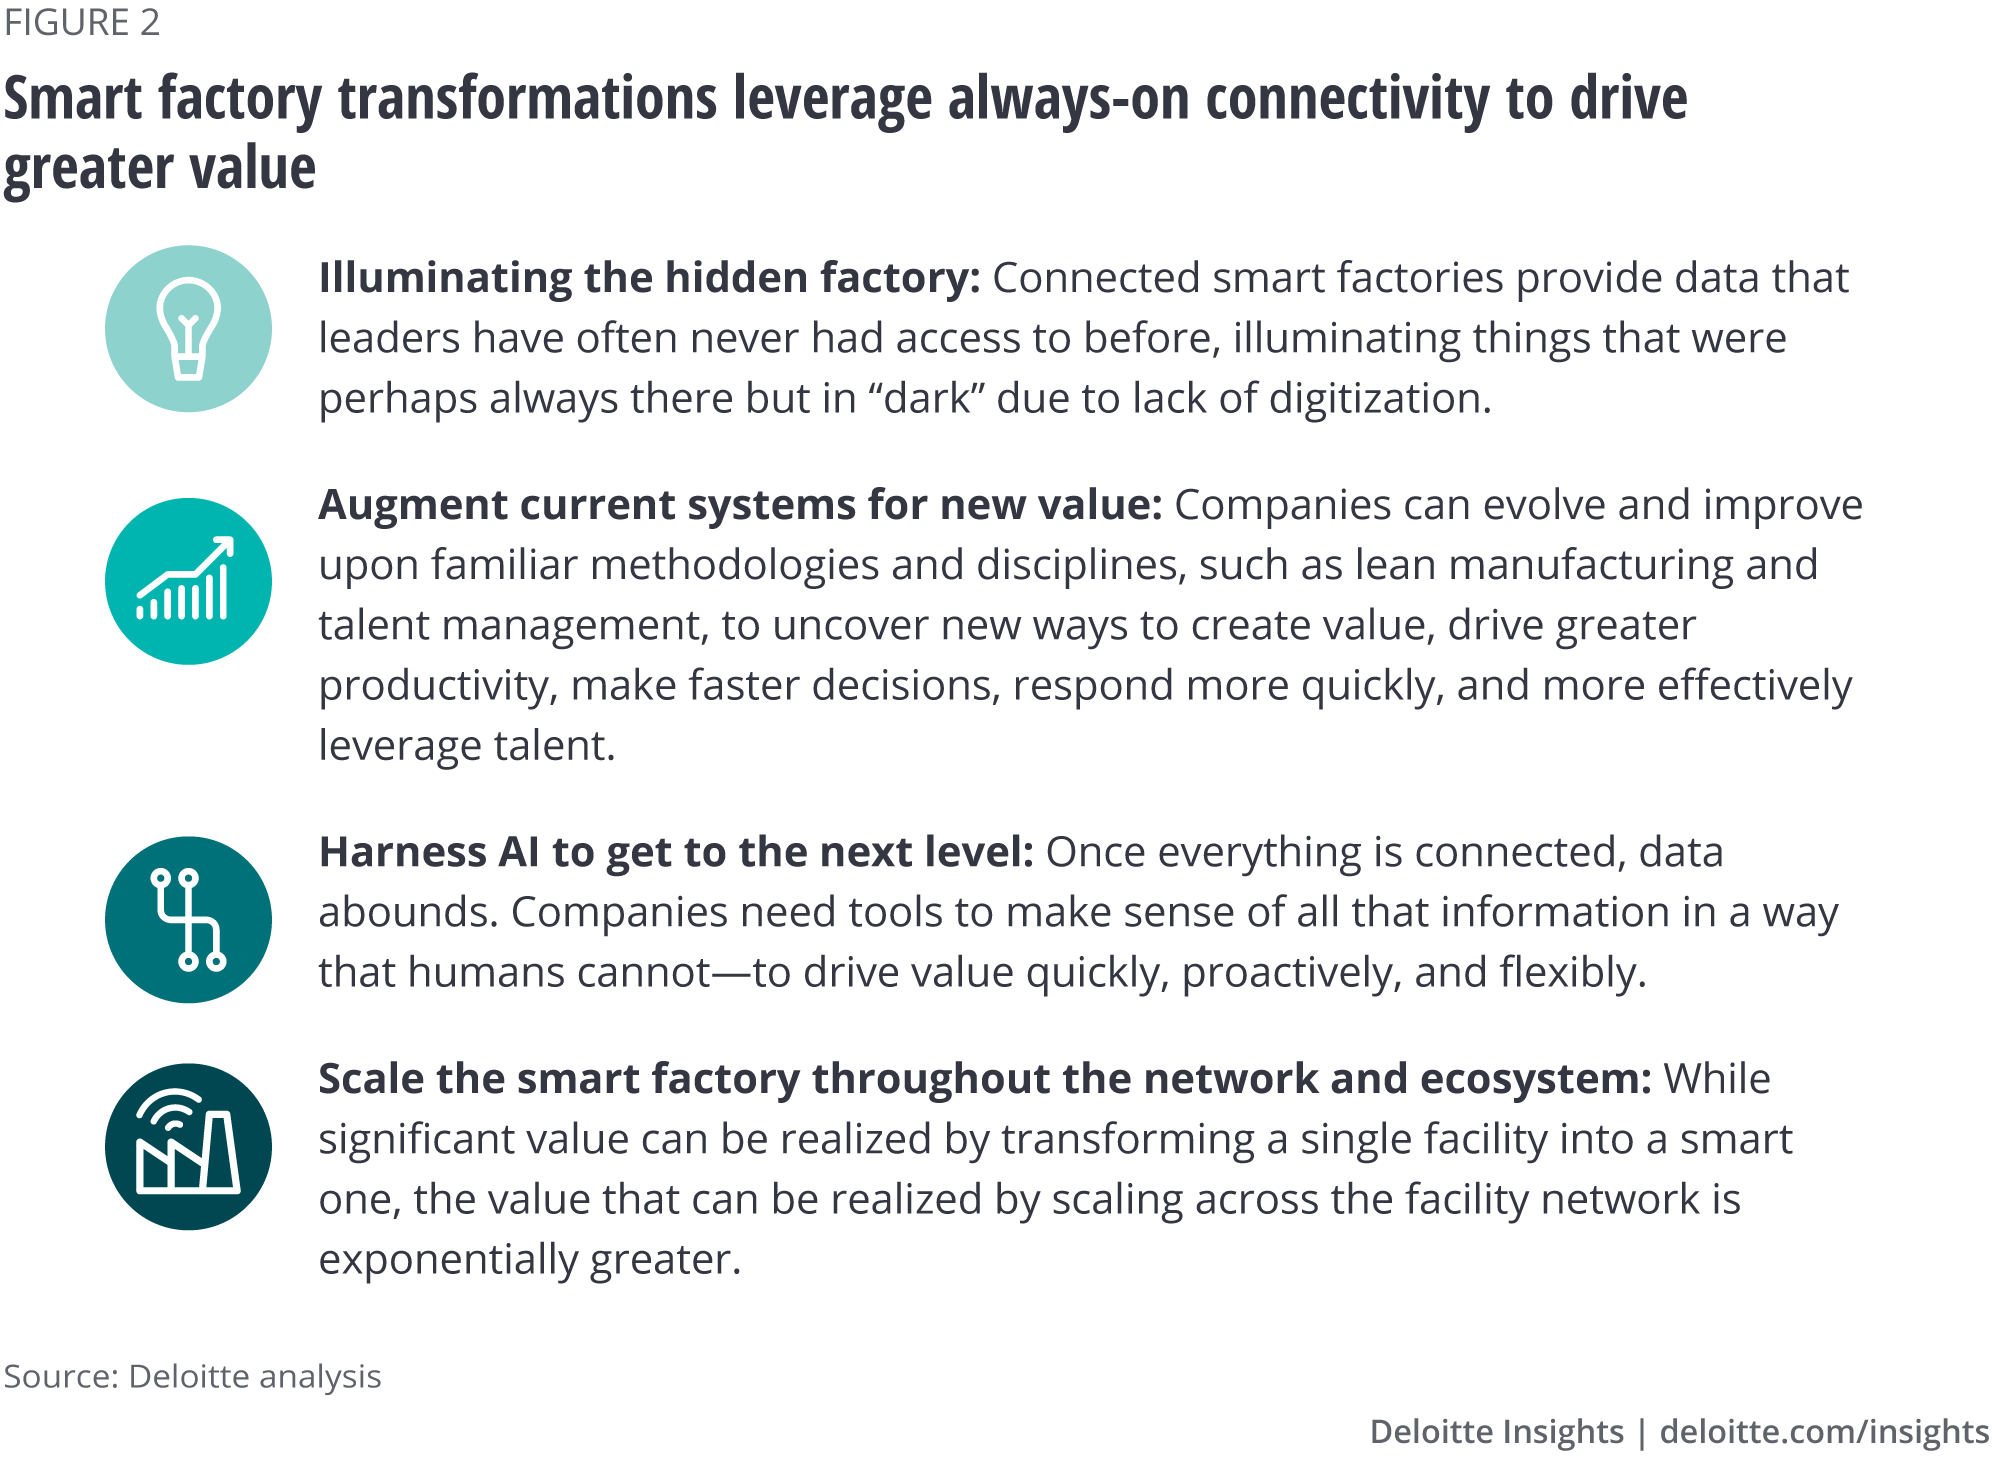 Smart factory transformations leverage always-on connectivity to drive greater value